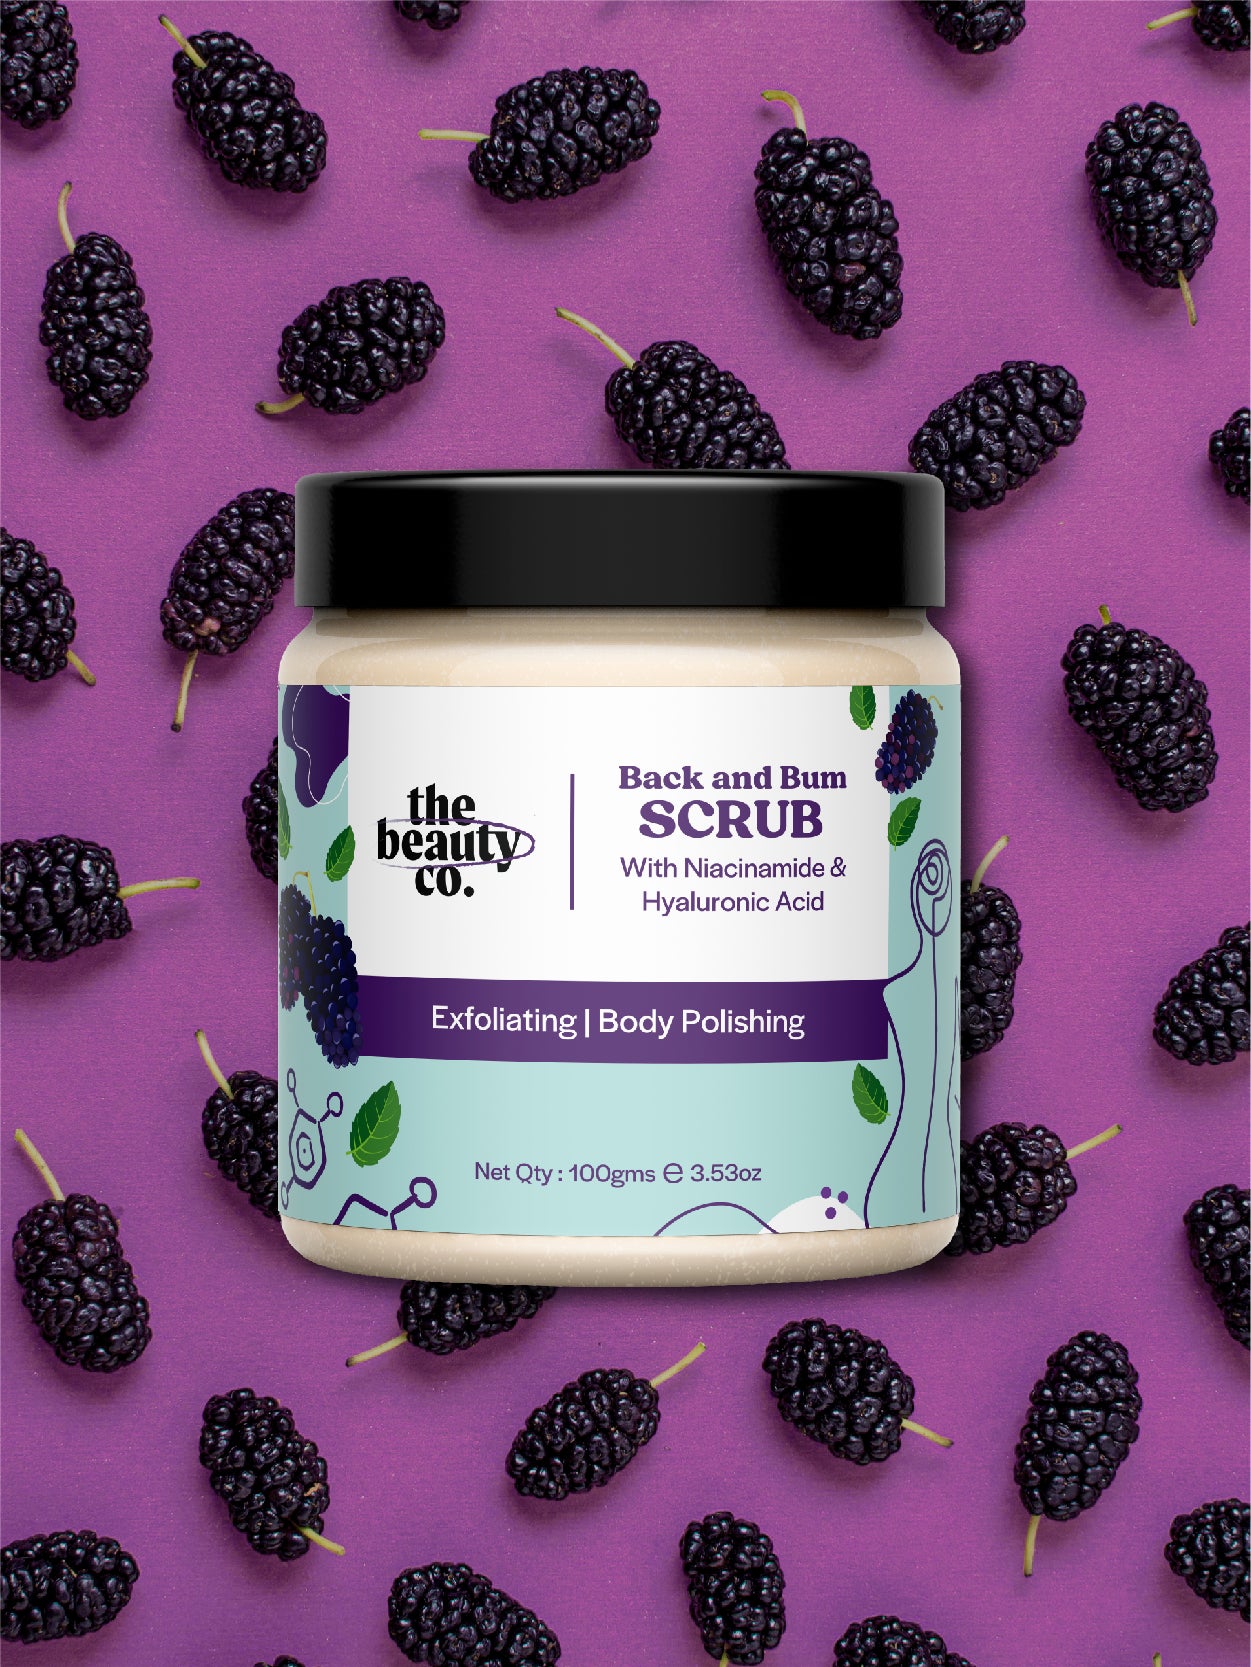 Back and Bum Scrub For Exfoliating and Body Polishing | 100 g